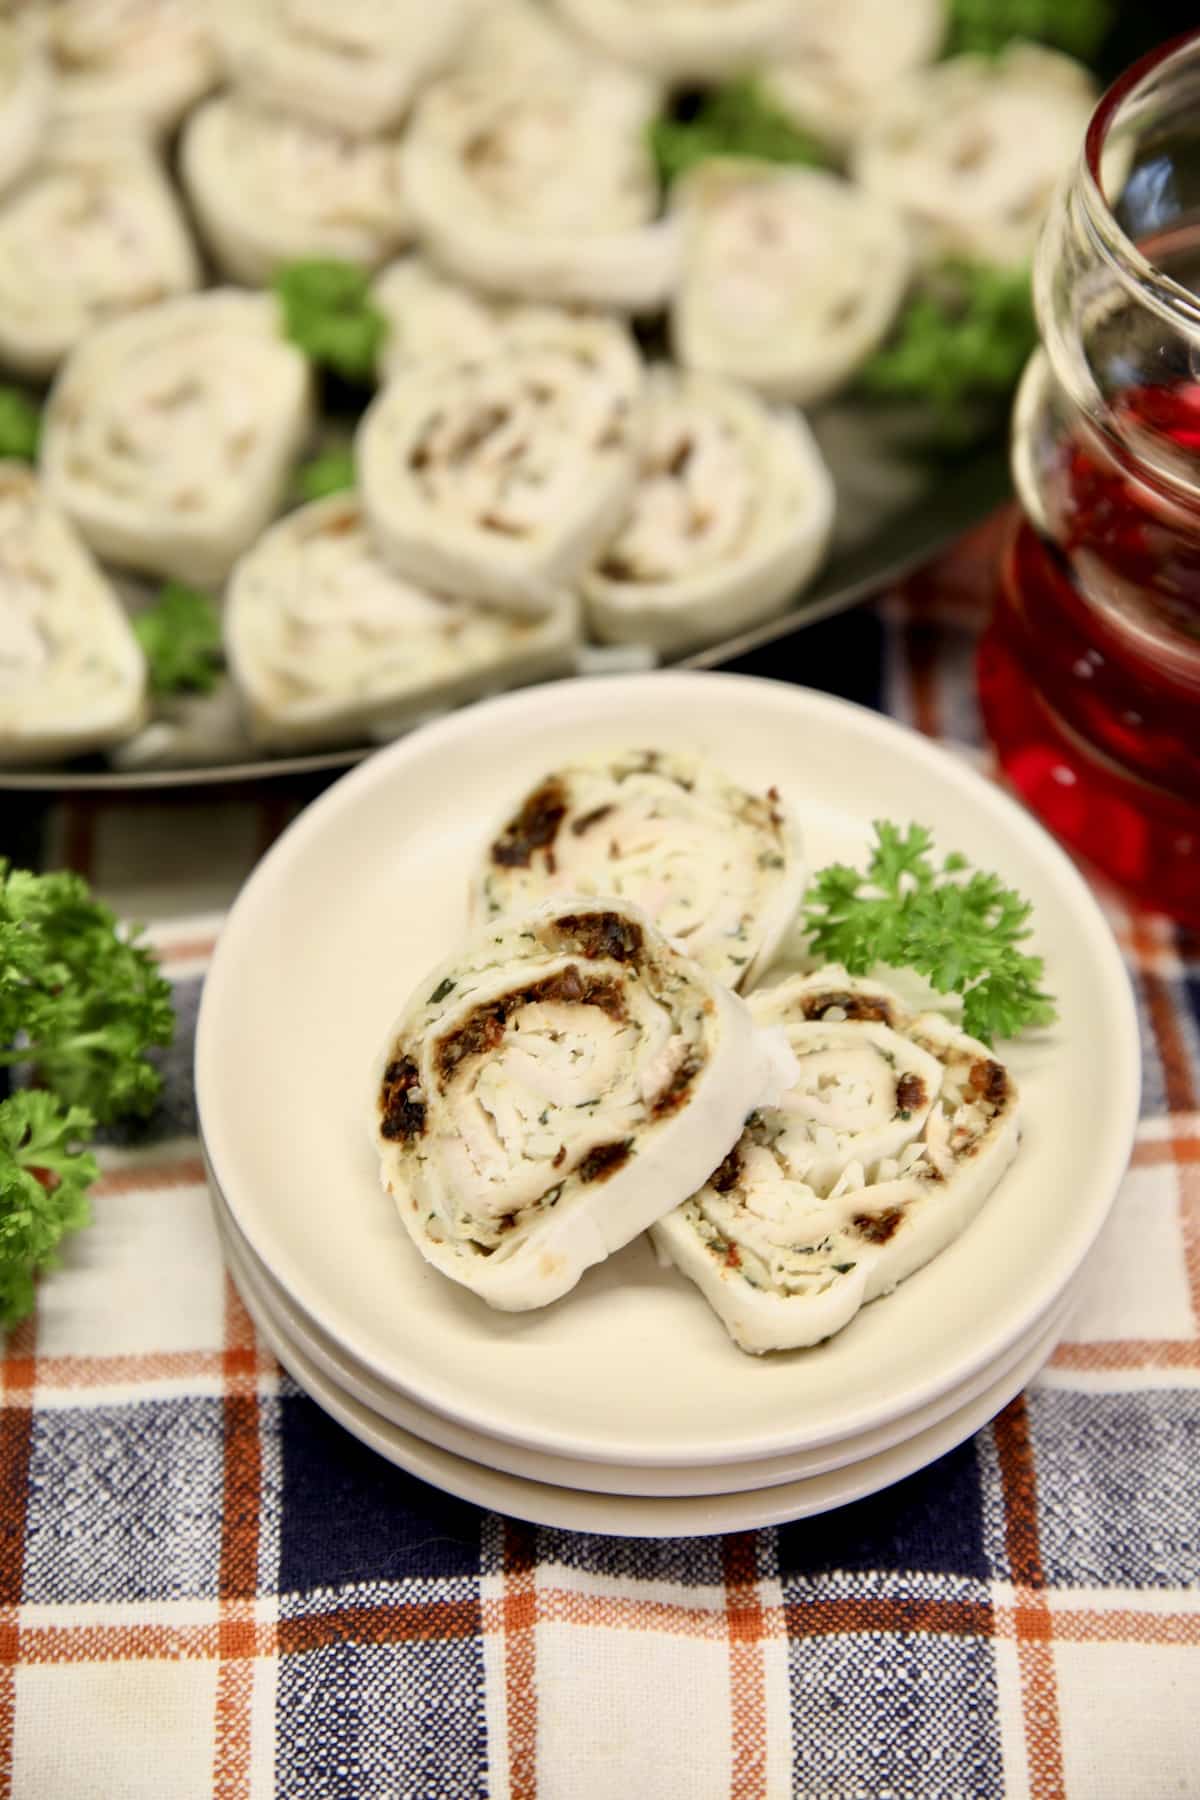 3 turkey pinwheels on a small plate, platter in background.